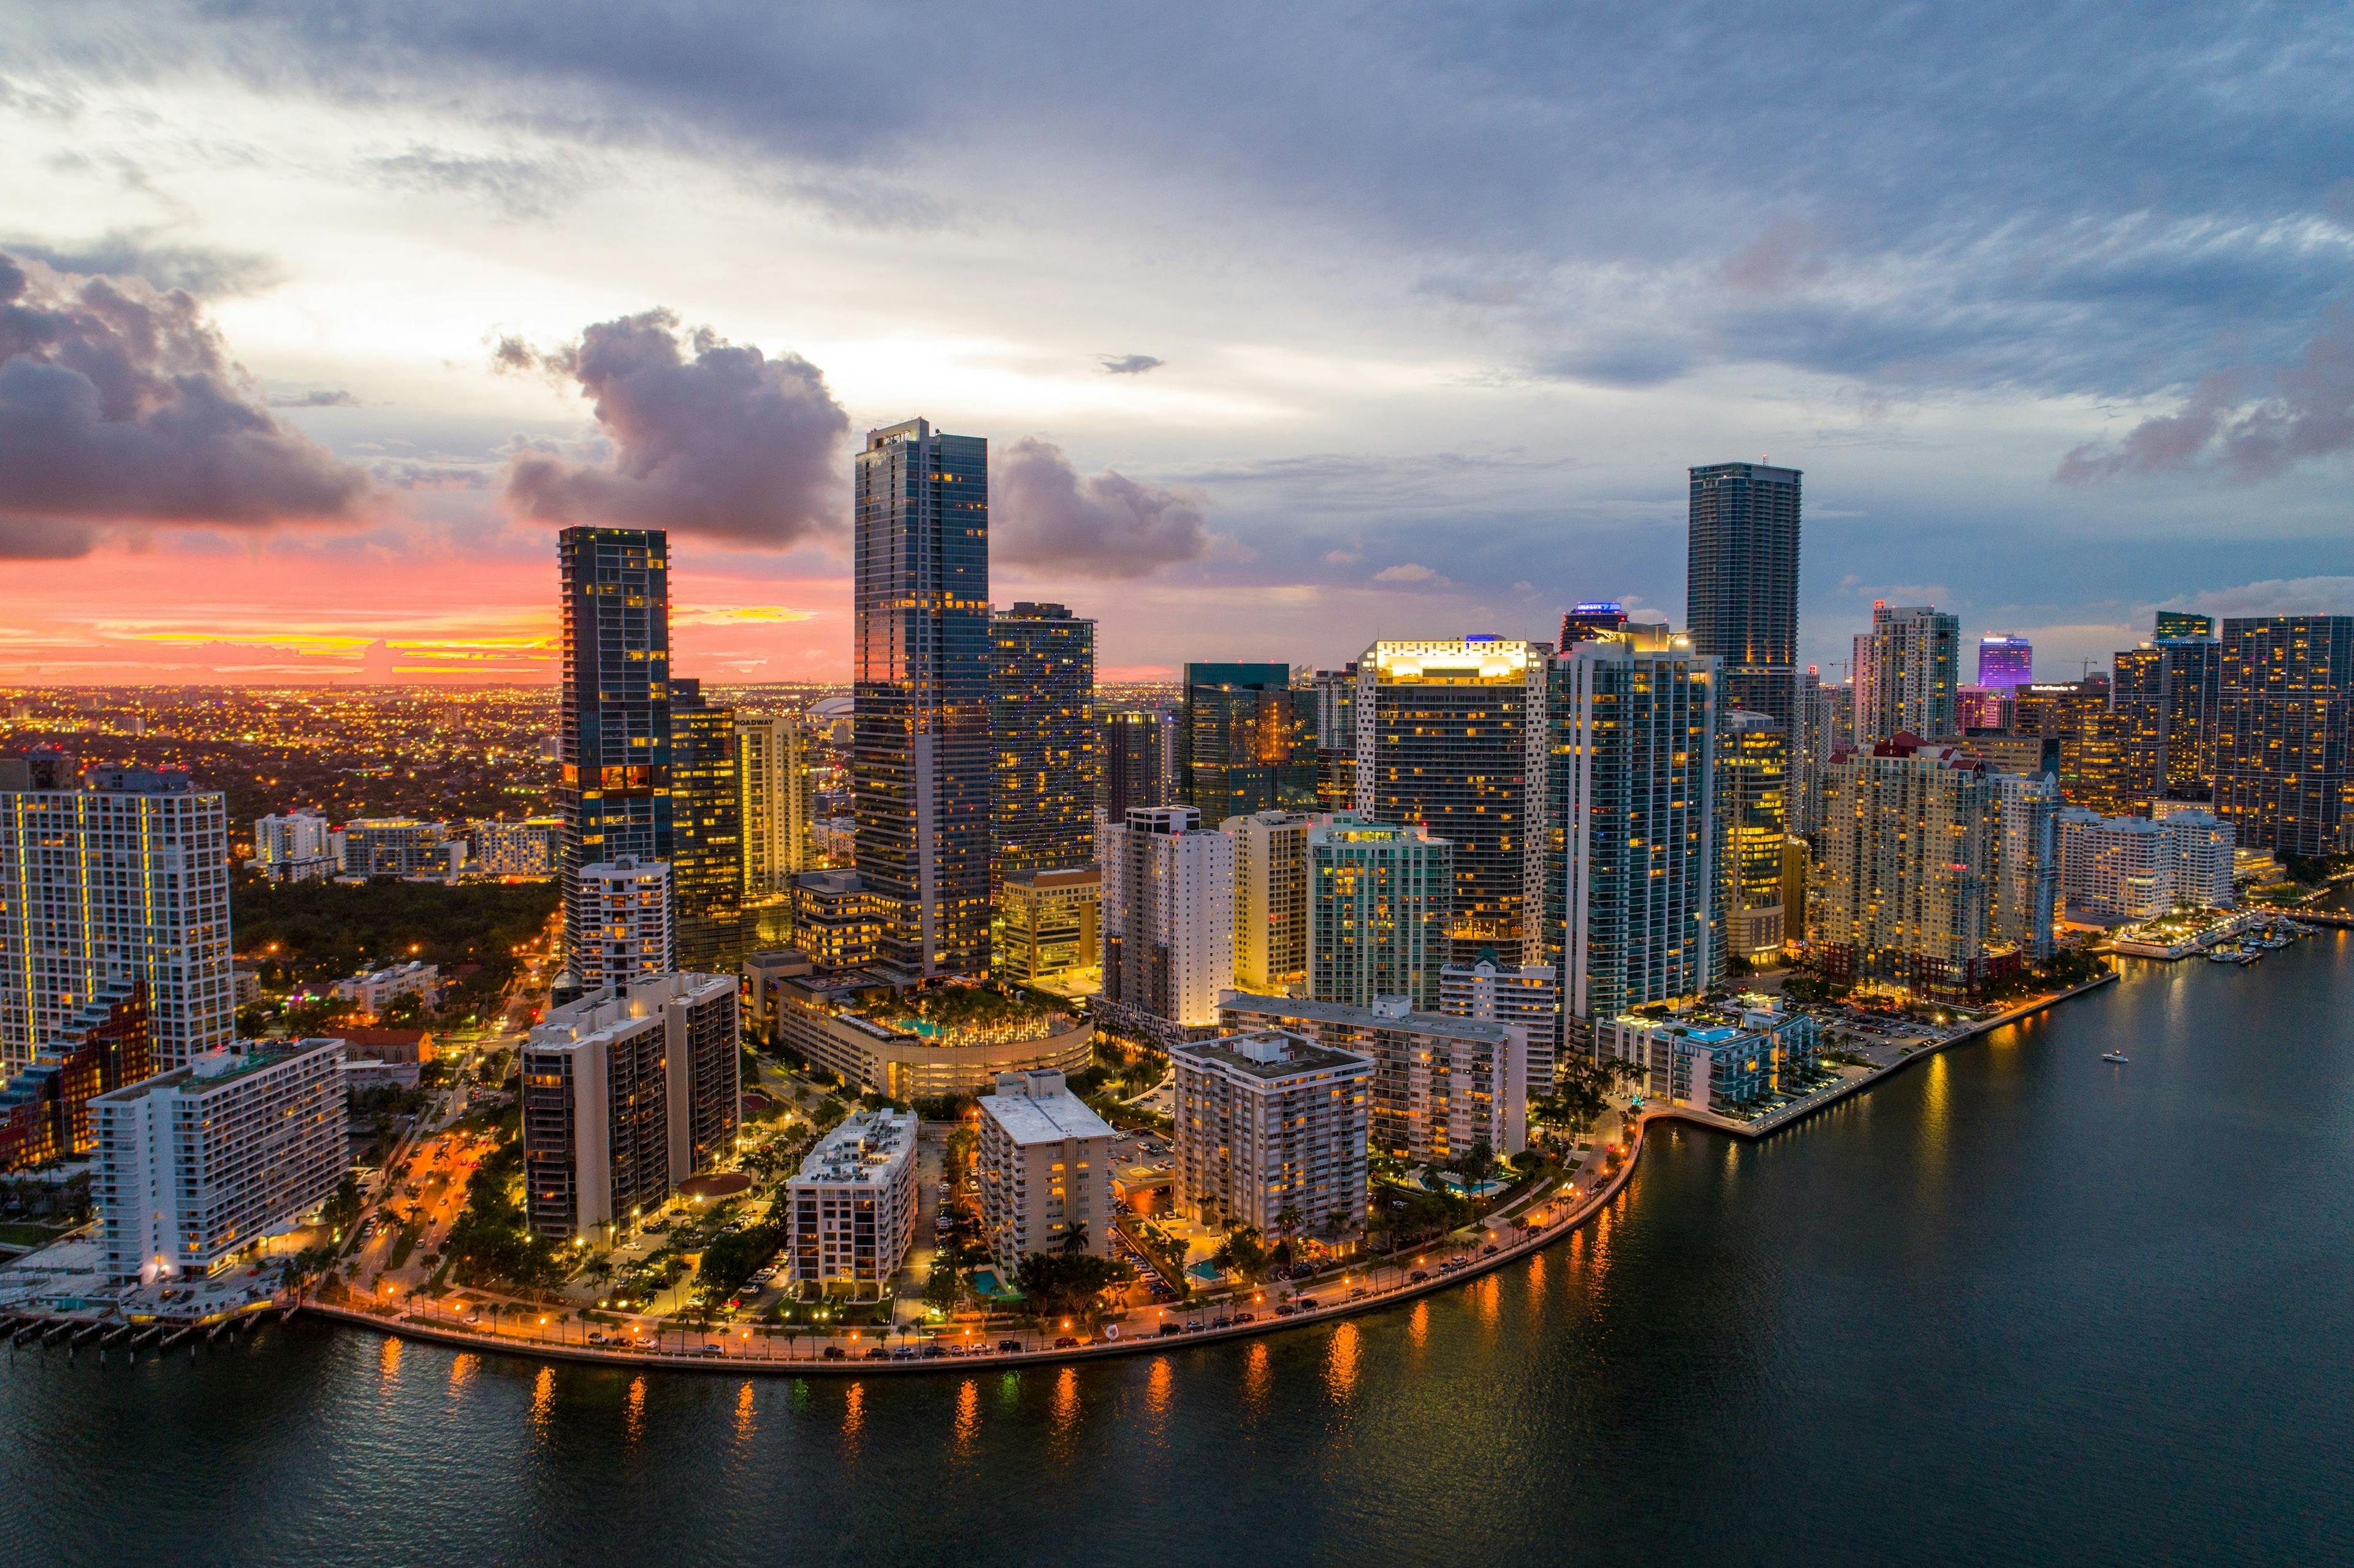 POLL: Are You Attending Winter Clinical Miami?